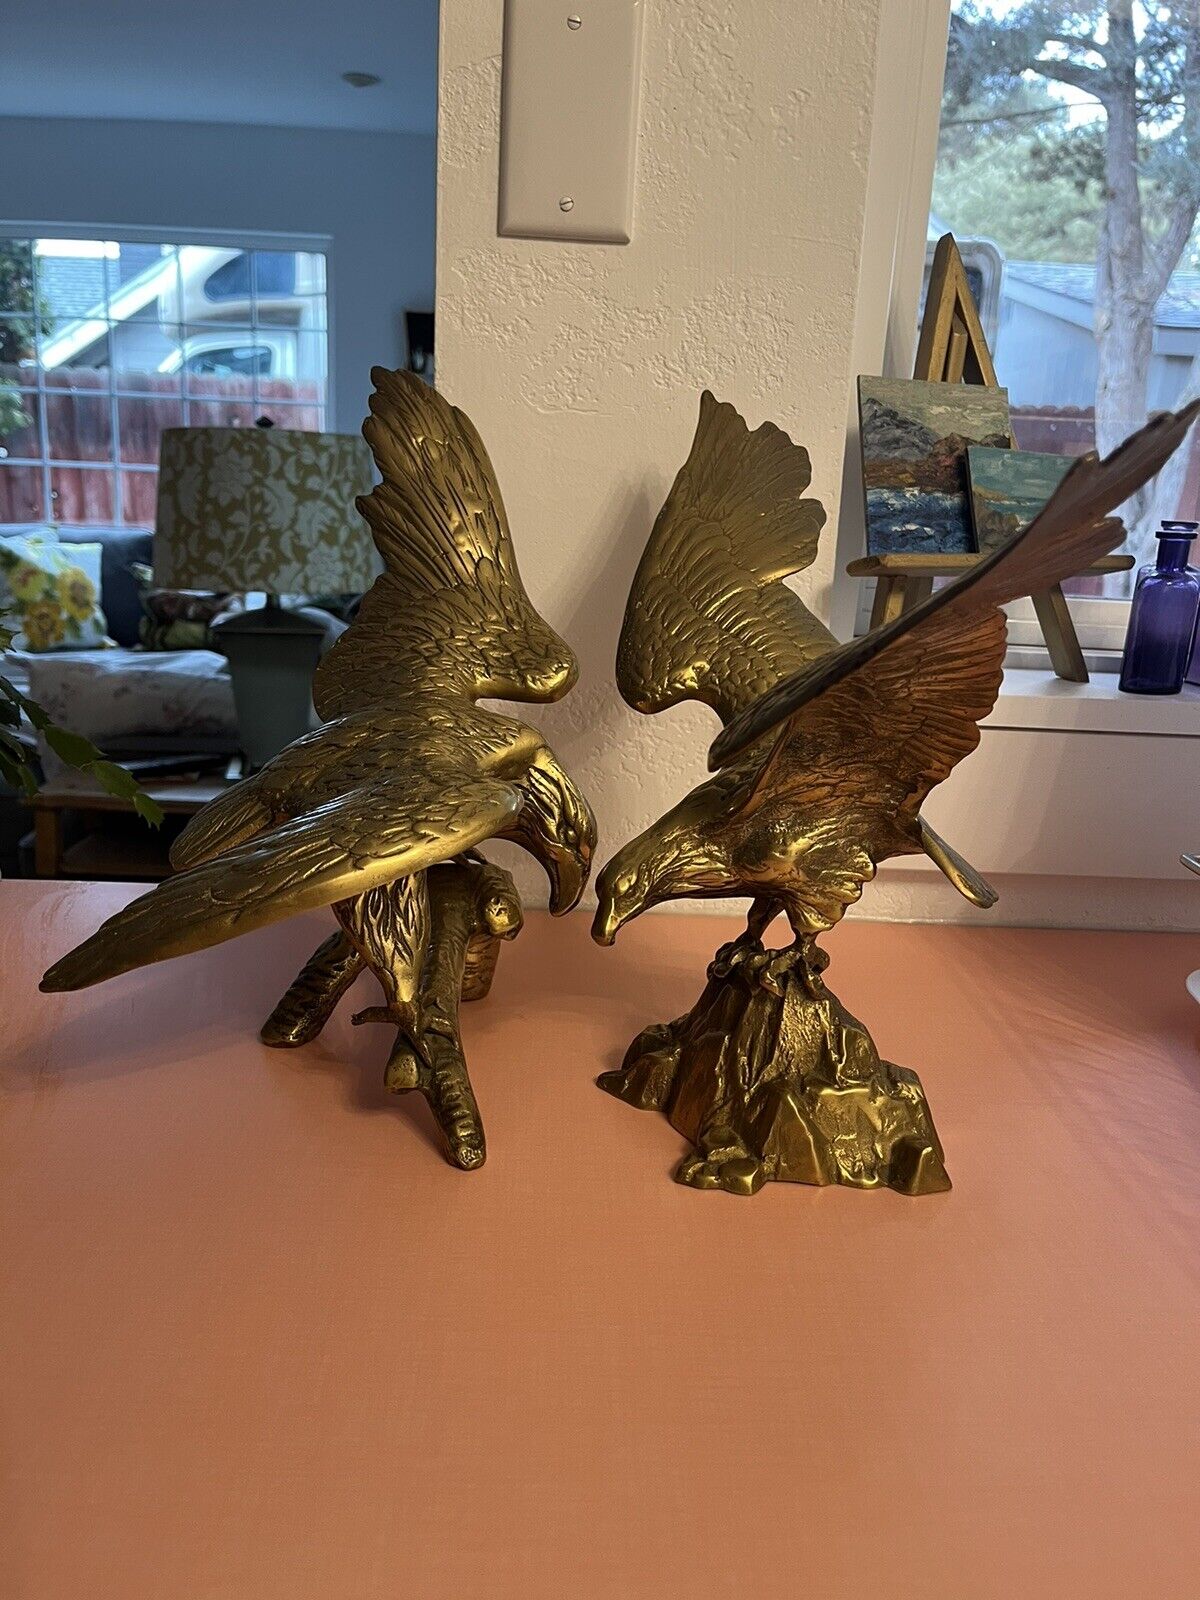 Magnificent Large Vintage Brass Eagle Statues, 12” Tall, 15” and 13” Wingspan